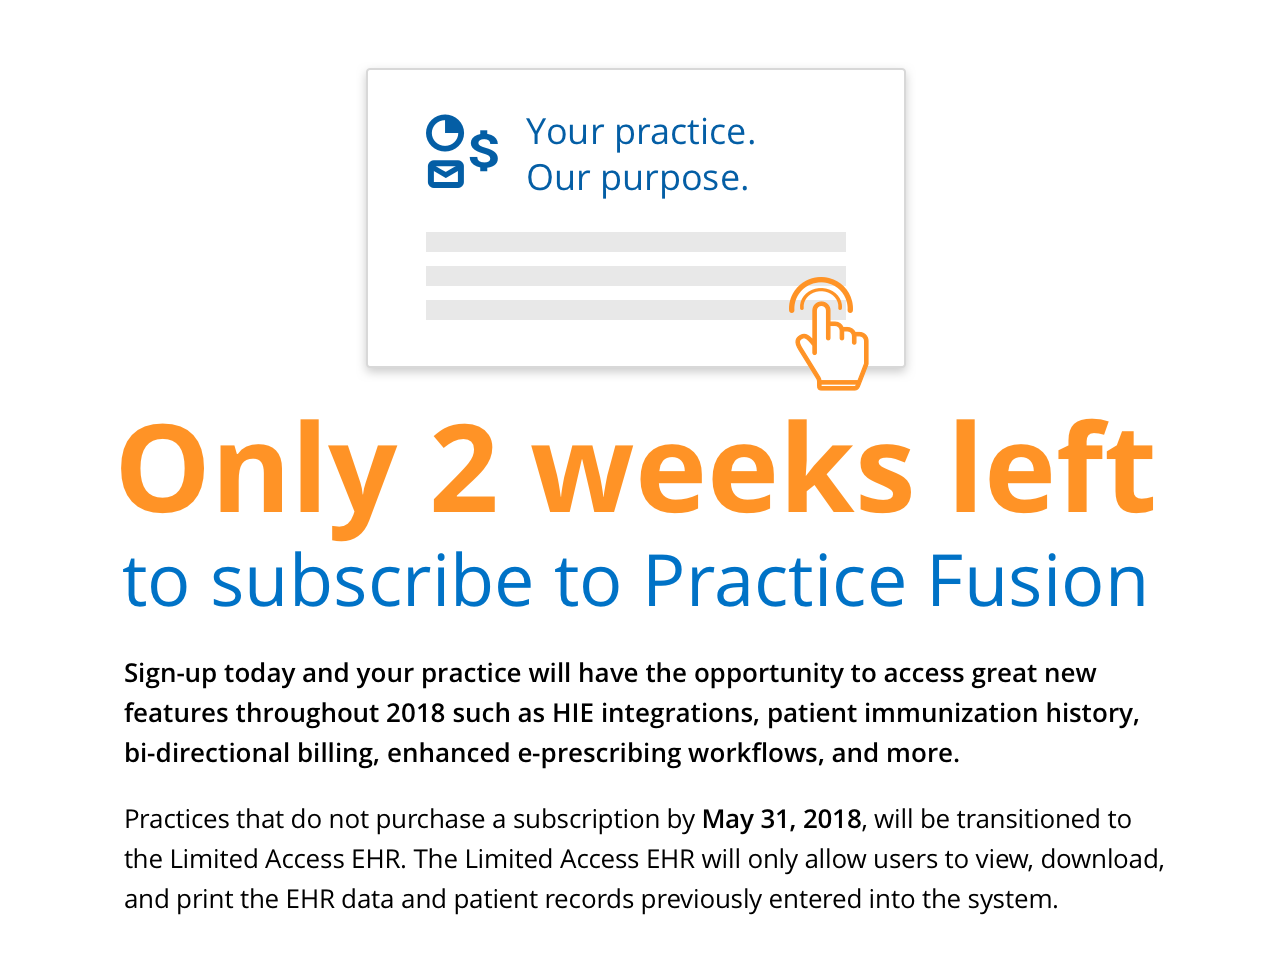 Sign-up today and your practice will have the opportunity to access great new features throughout 2018 such as HIE integrations, patient immunization history, bi-directional billing, enhanced e-prescribing workflows, and more.